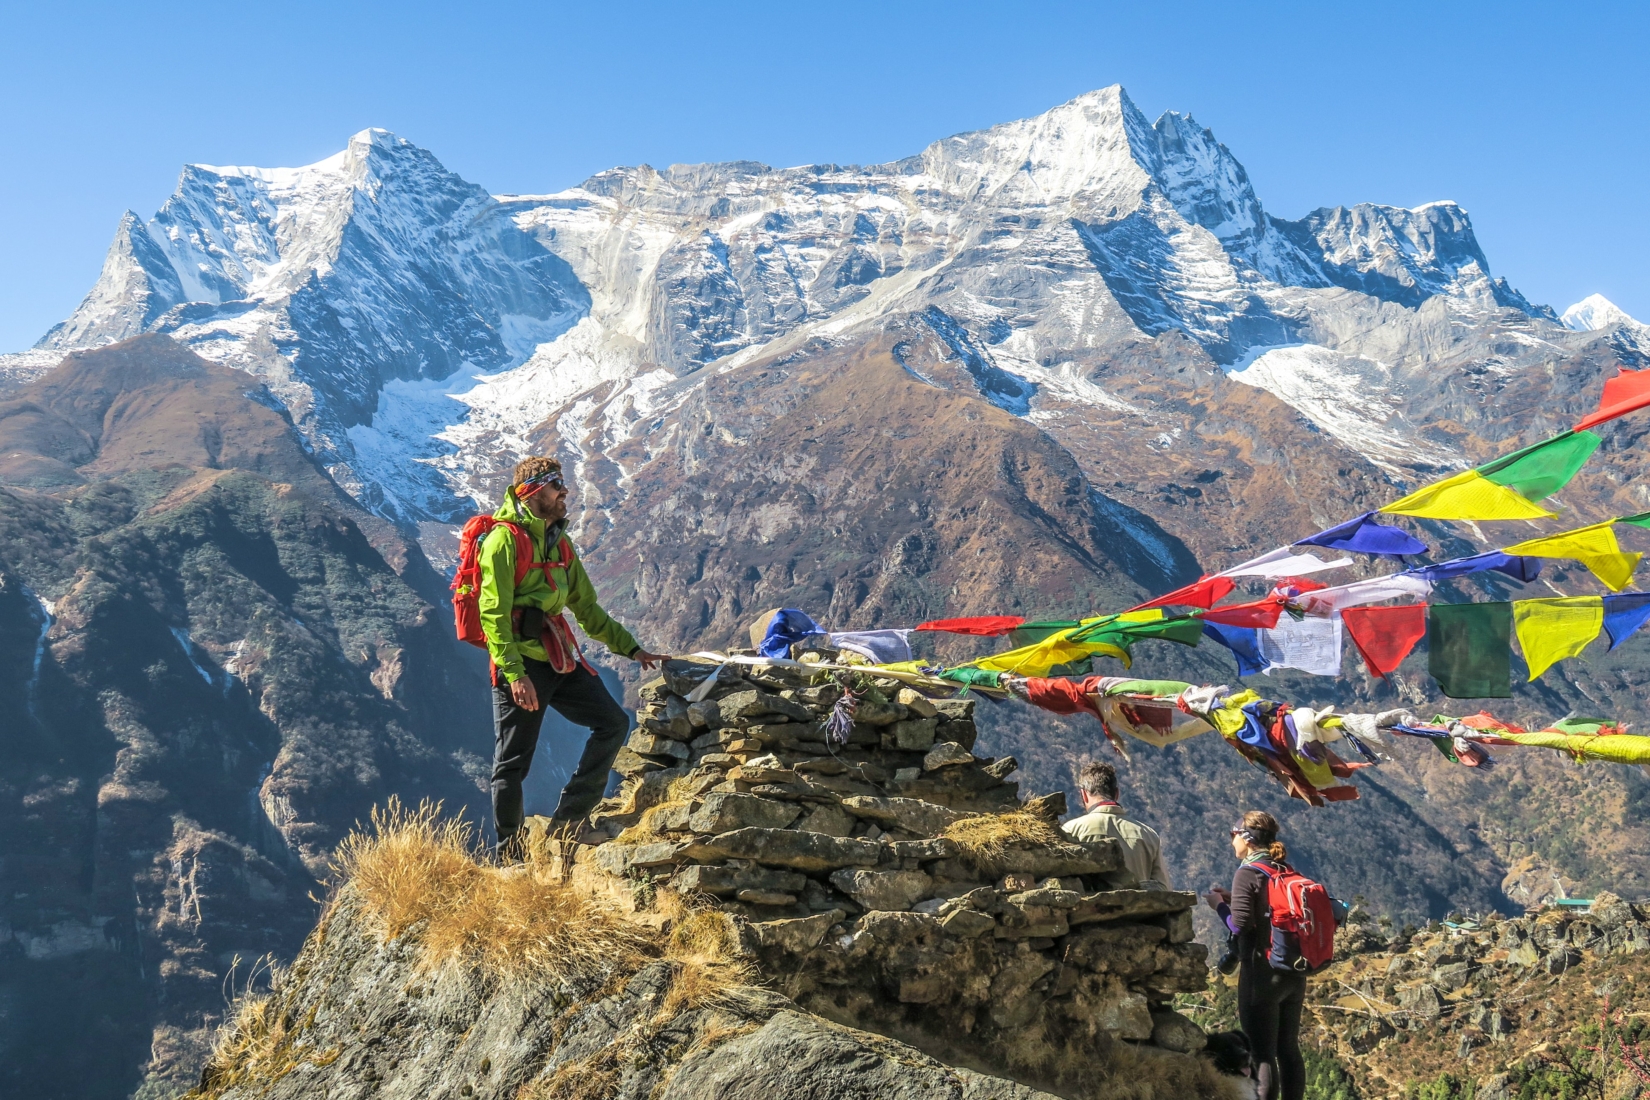 A photograph of a trekker en route to Everest base camp, standing by a rock cairn and Himalayan prayer flags. There are snow-covered mountains in the background